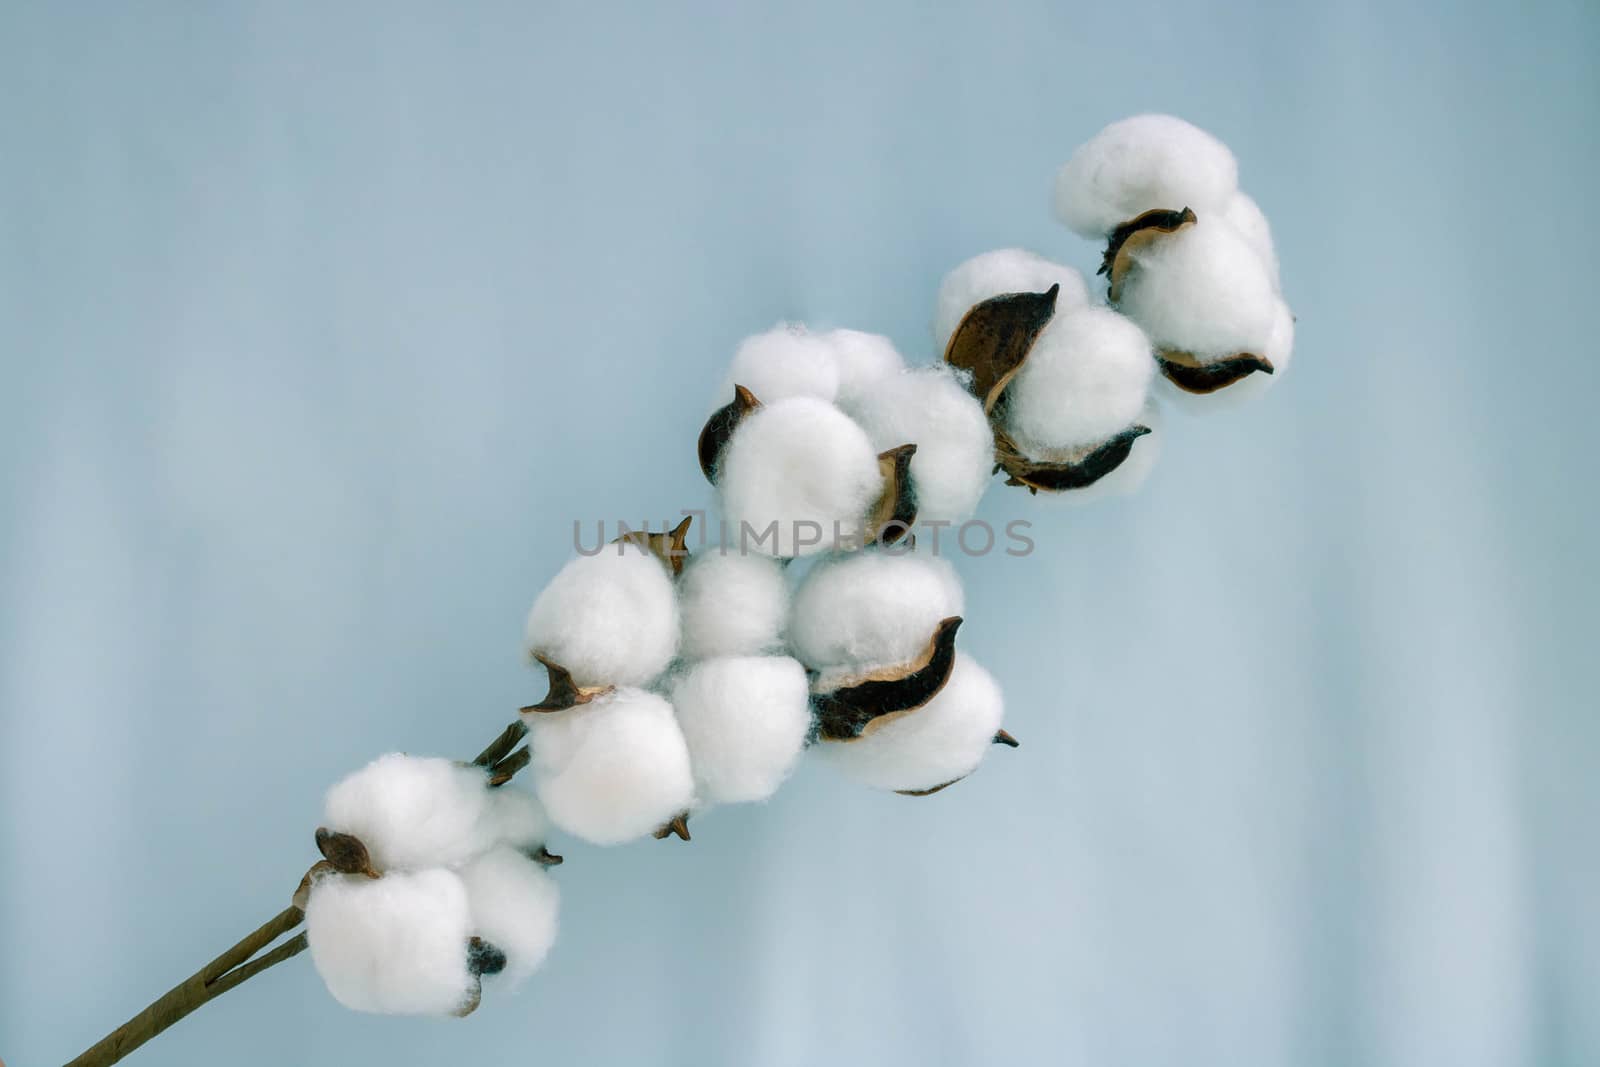 A sprig of cotton on a soft blue fabric.